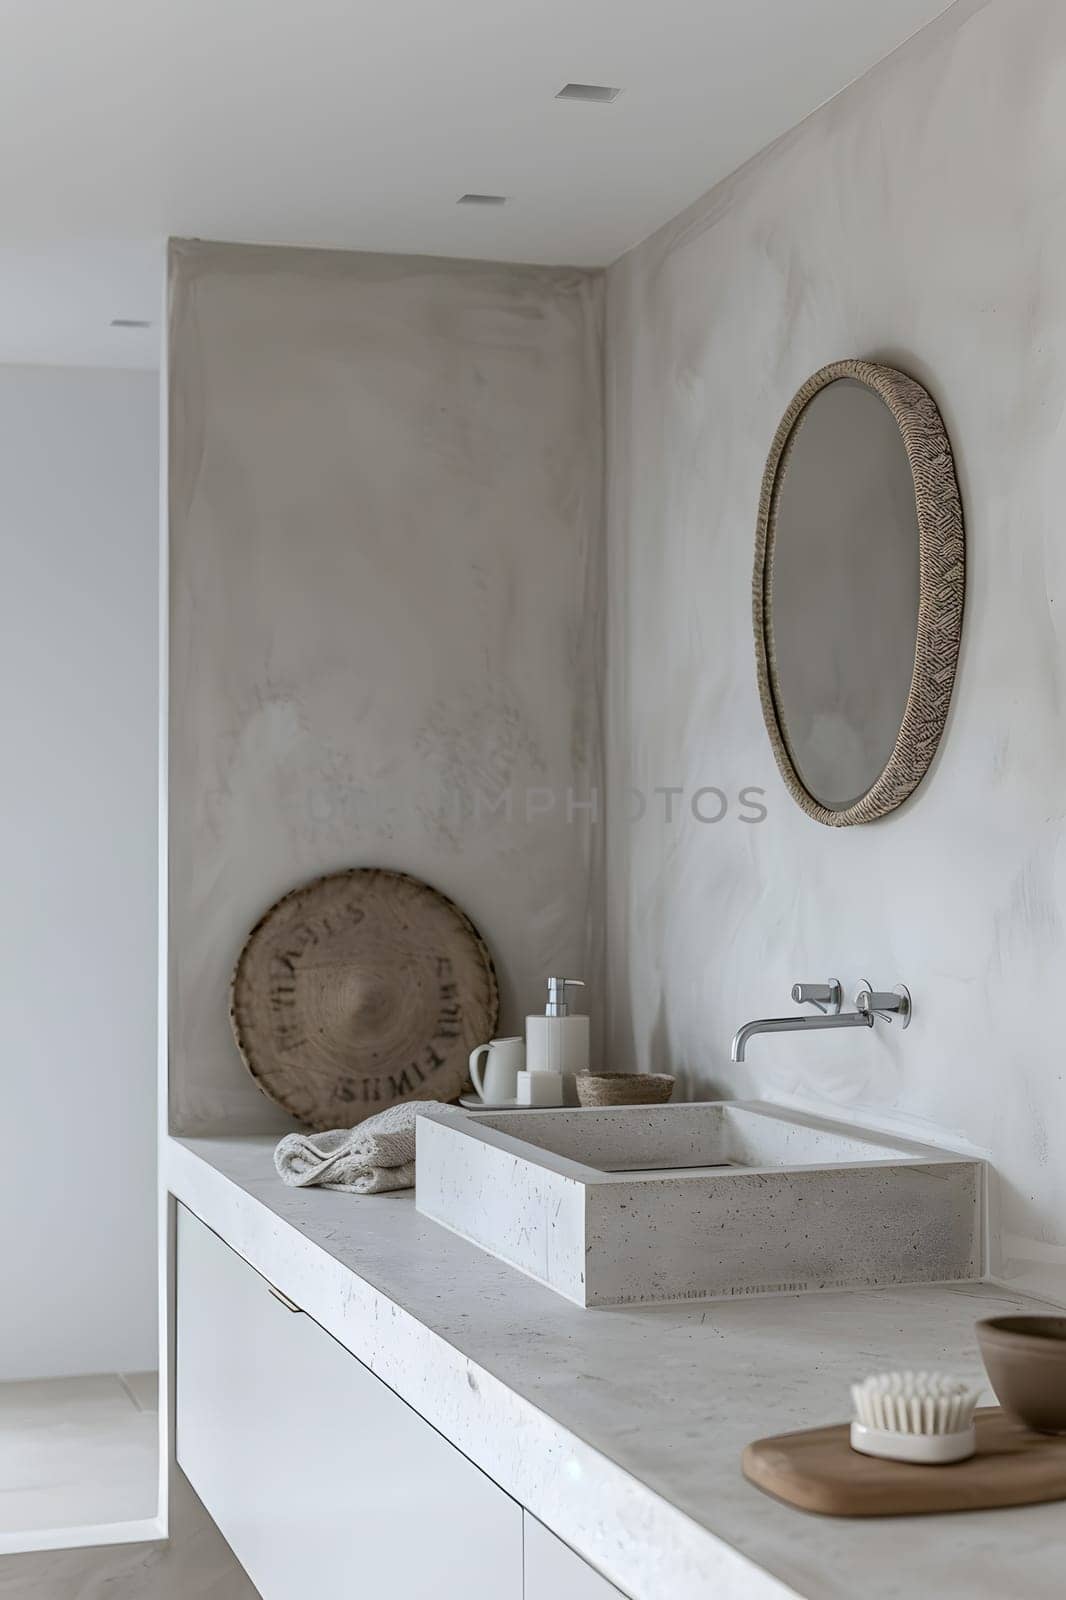 A bathroom in a building with a sink and a mirror on the wall. The fixtures are made of metal and composite materials. There is a window, wood accents, and dishware on a shelf